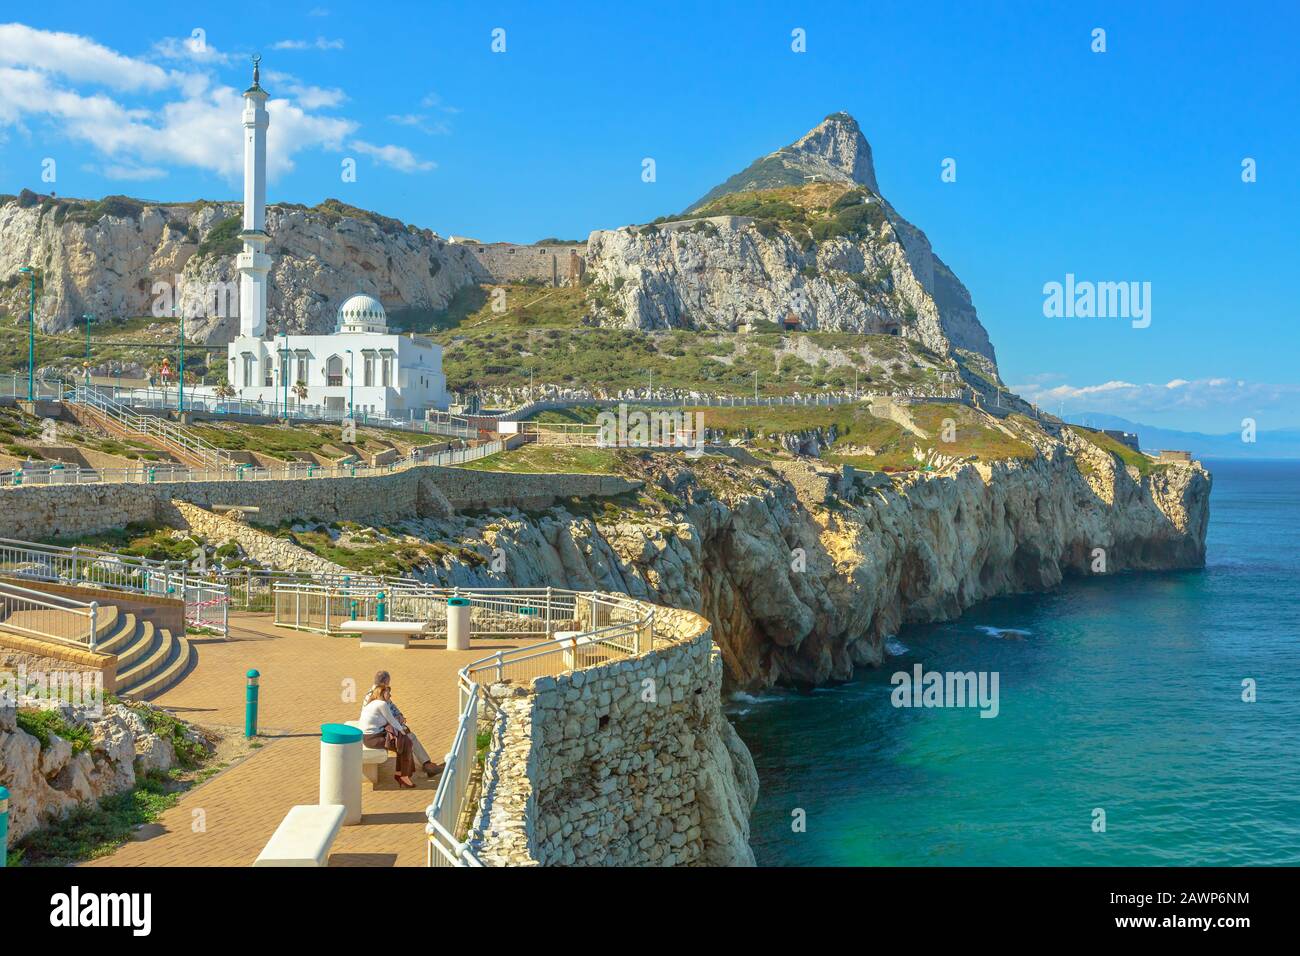 Gibraltar, United Kingdom - April 24, 2016: Europa Point with Ibrahim-al-Ibrahim Mosque and the profile of Gibraltar Rock. Europa Point is the Stock Photo